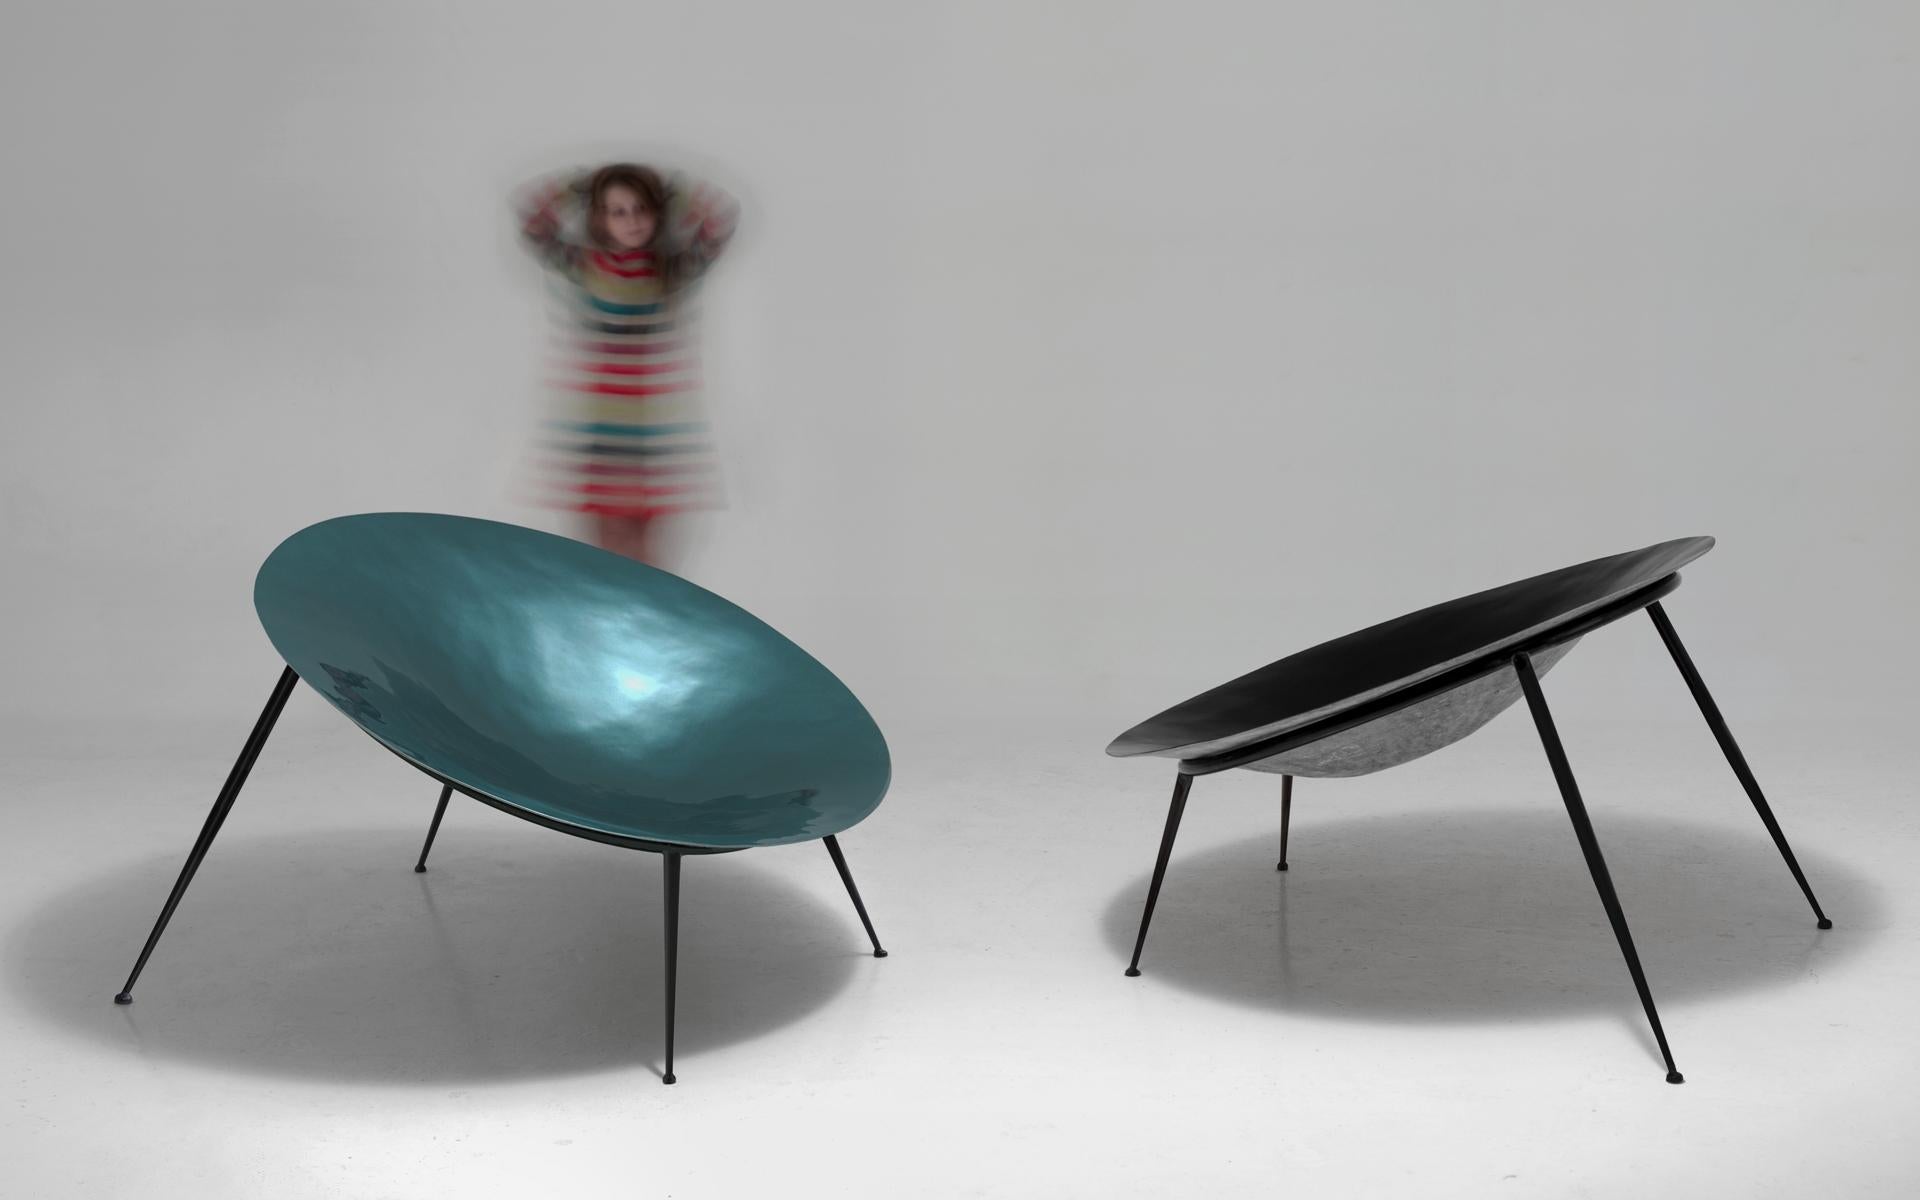 Pupik chair by Imperfettolab
Dimensions: 120 x 120 x H 82 cm
Materials: Fibreglass

Imperfetto Lab
Who we are ? We are a family.
Verter Turroni, Emanuela Ravelli and our children Elia, Margherita and Eusebio.
All together, we are separate